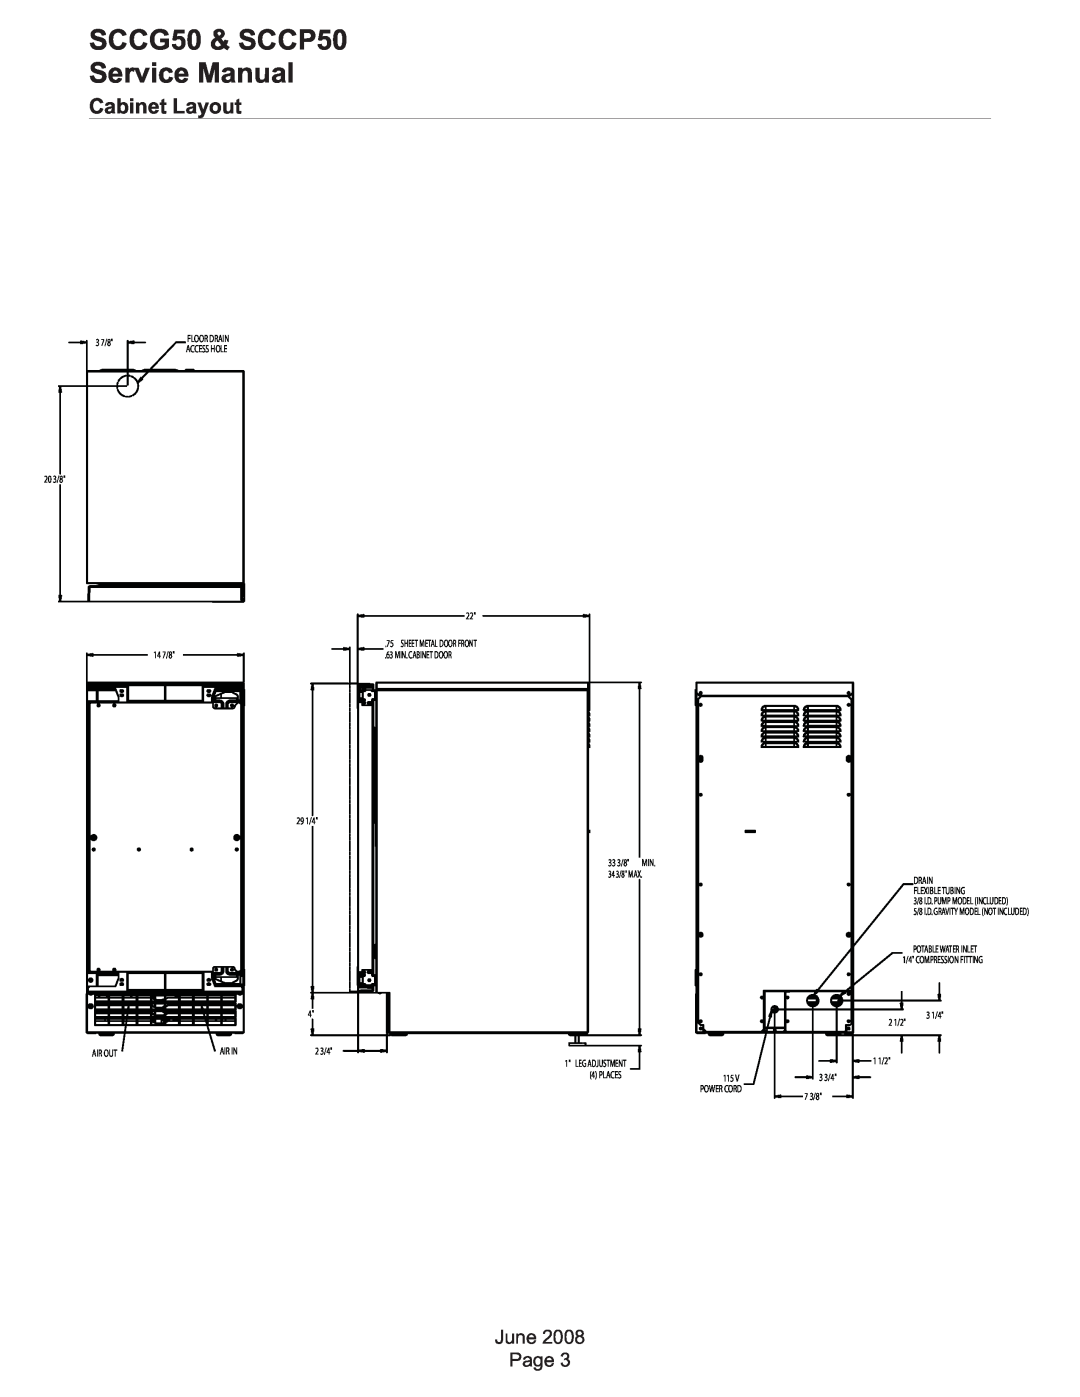 Scotsman Ice SCCP50, SCCG50 service manual Cabinet Layout, June Page 